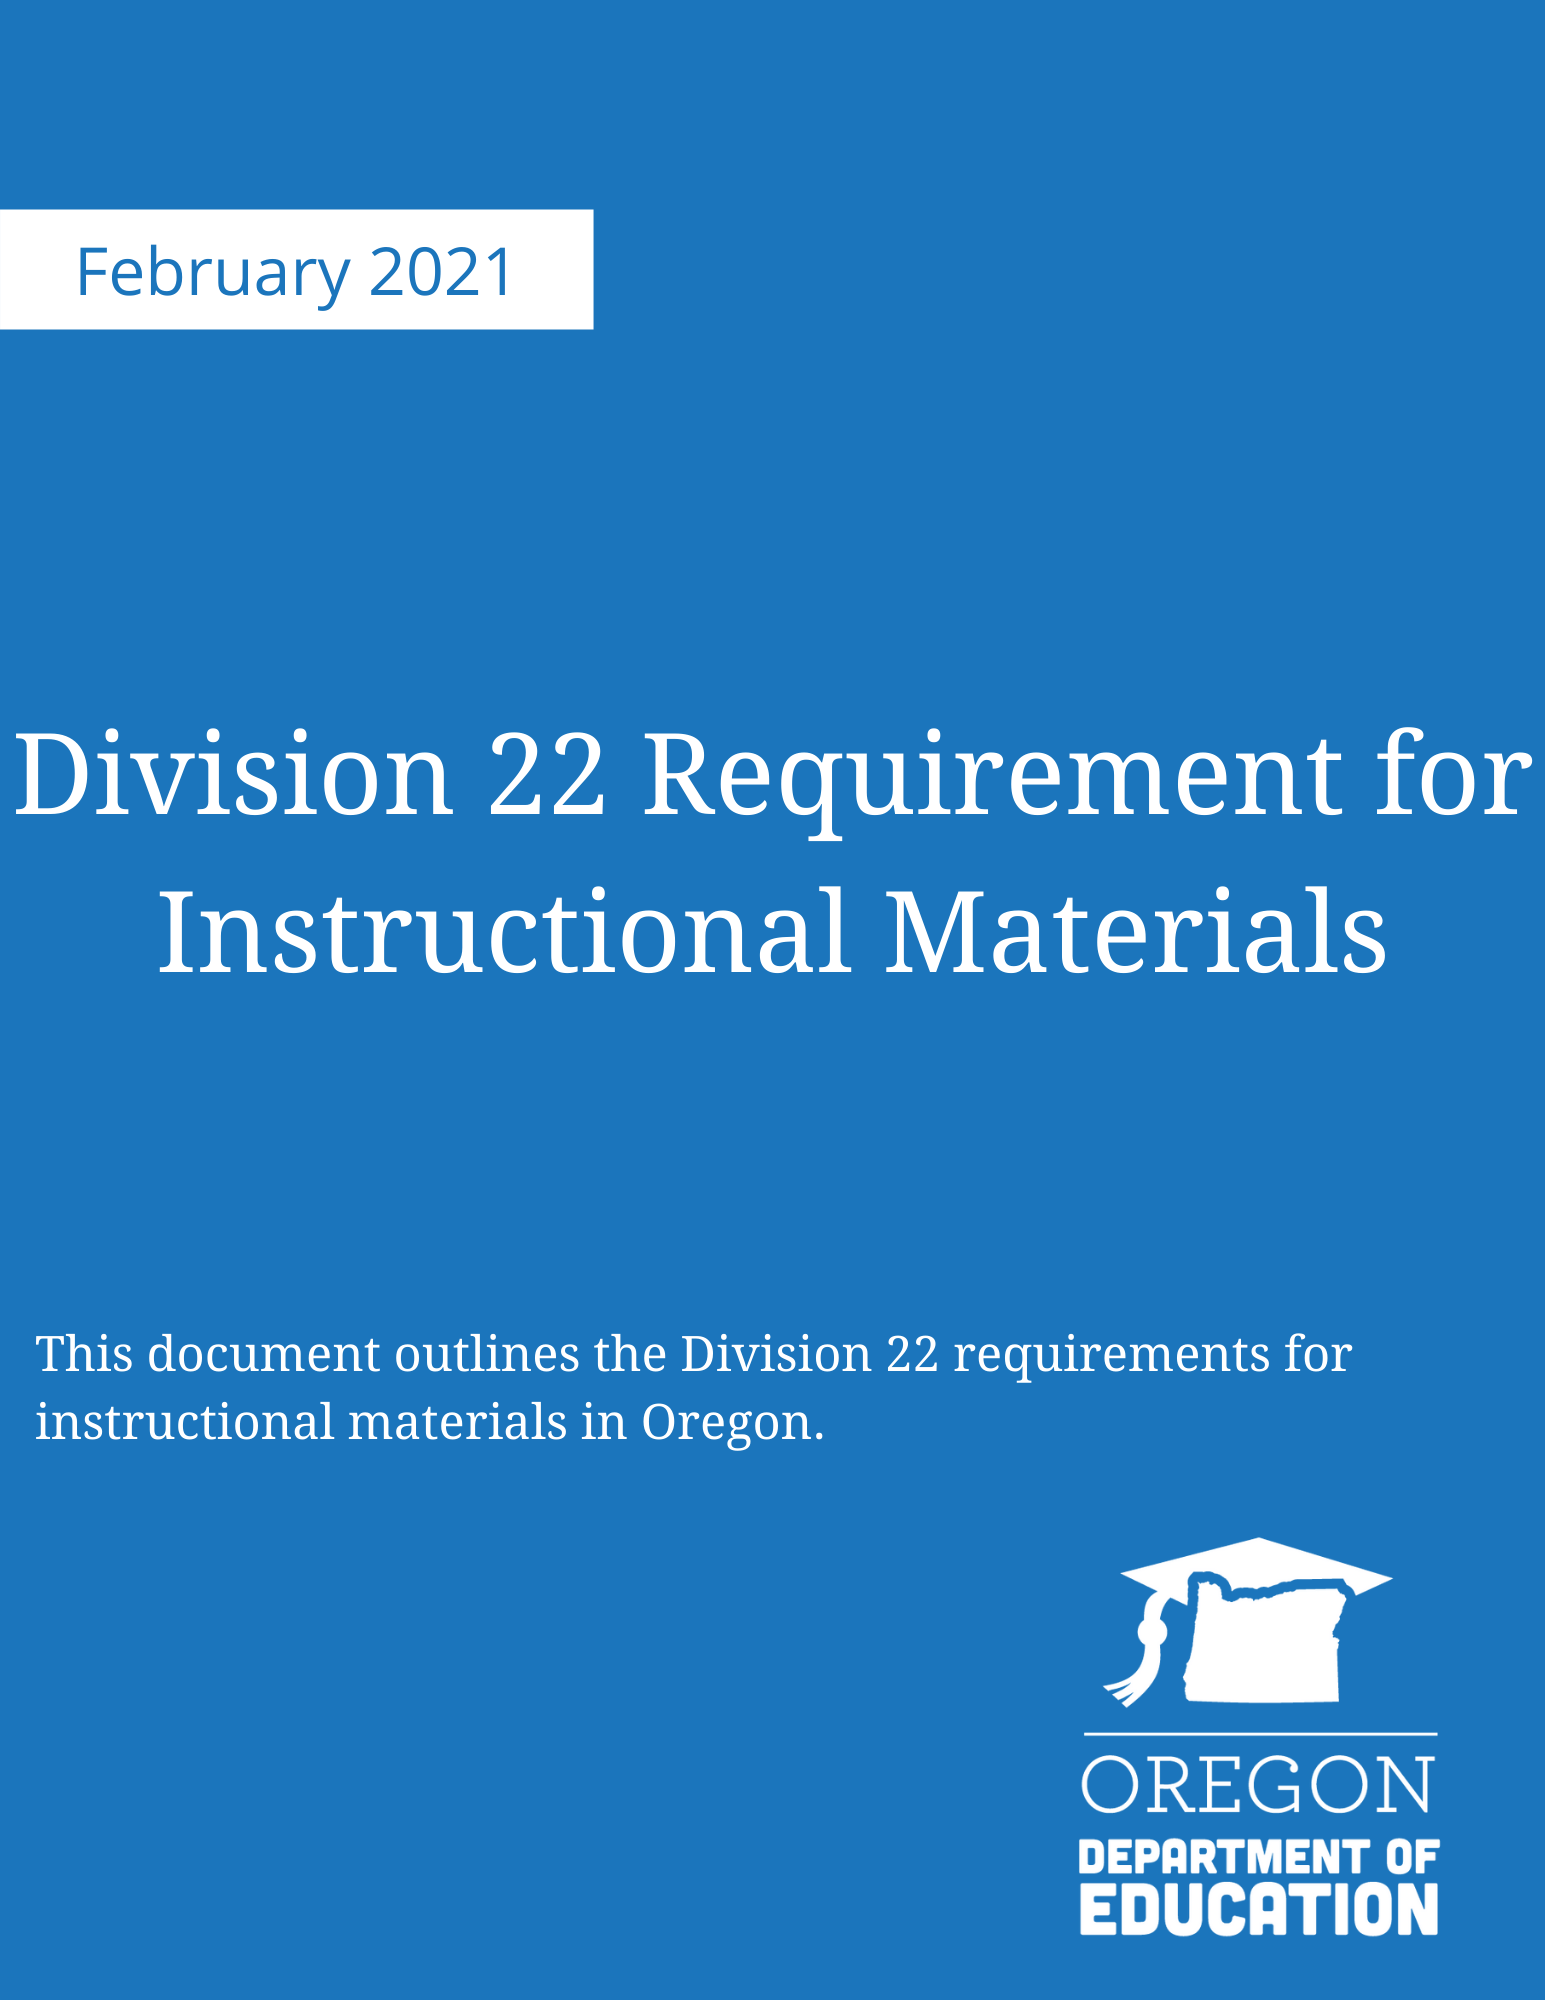 Divisions 22 Requirements for Instructional Materials